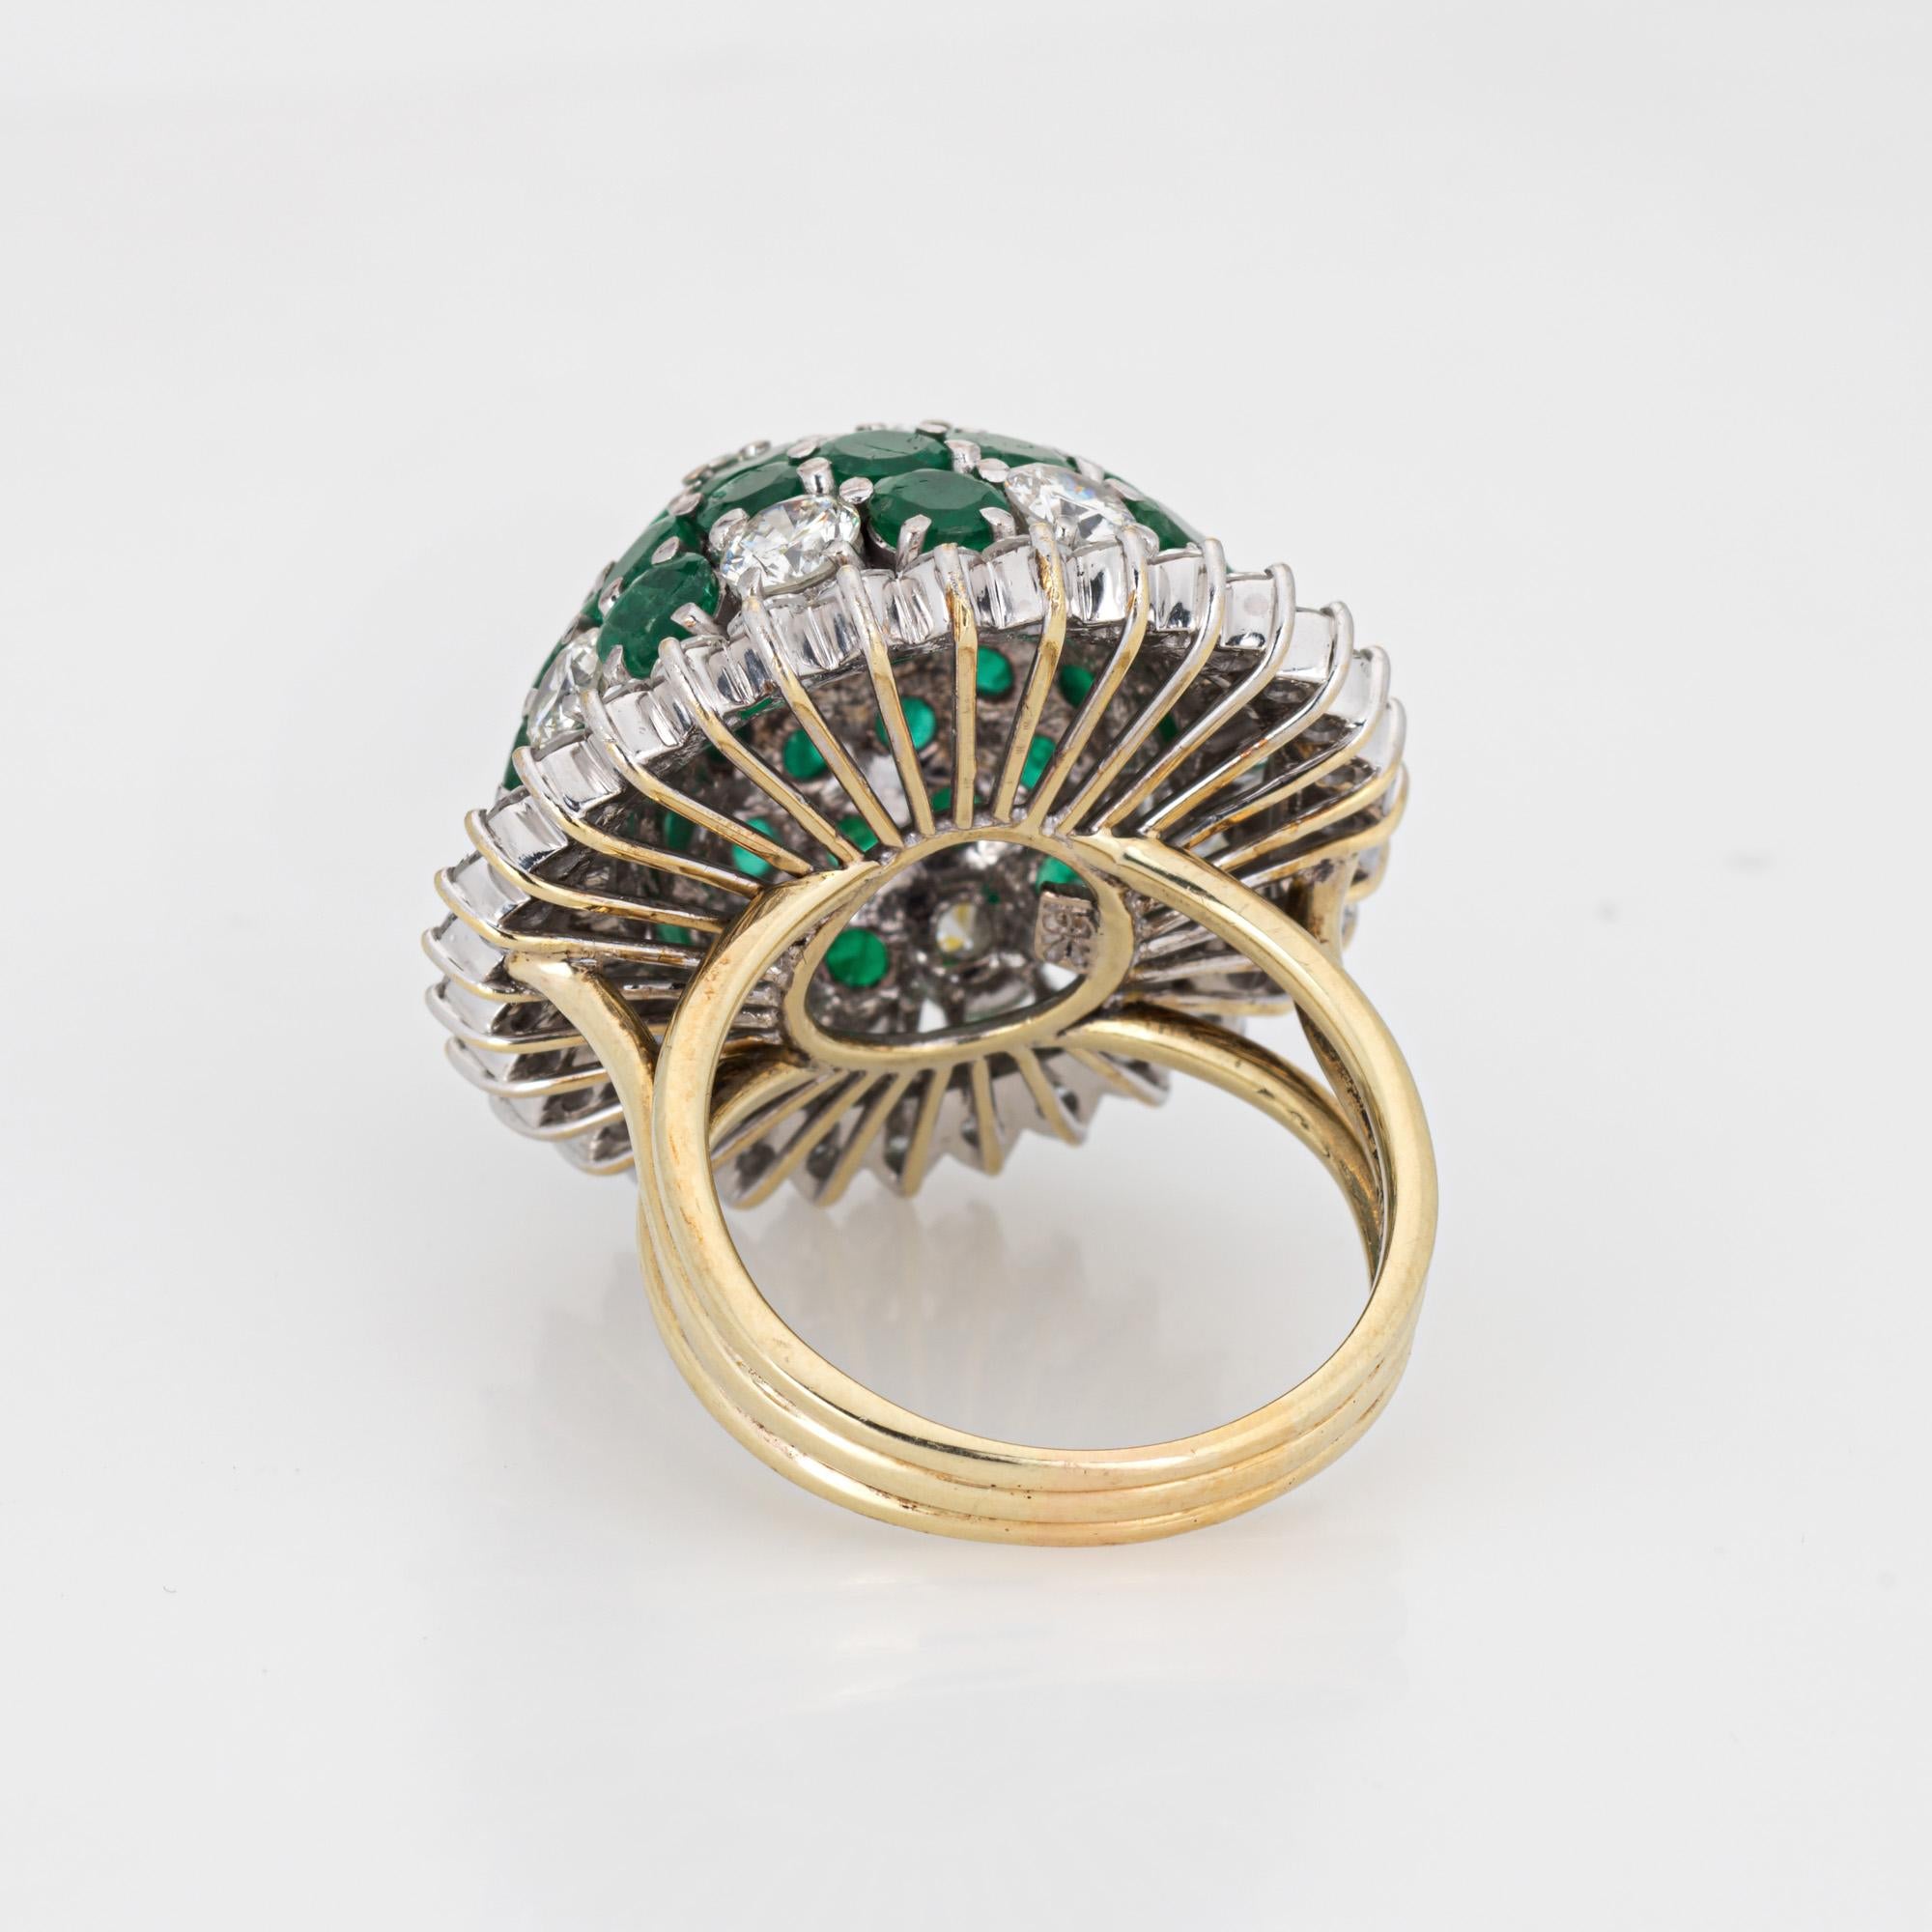 2.50ct Diamond Emerald Dome Ring 60s Vintage 18k Gold Sz 6.75 Cocktail Jewelry In Good Condition For Sale In Torrance, CA